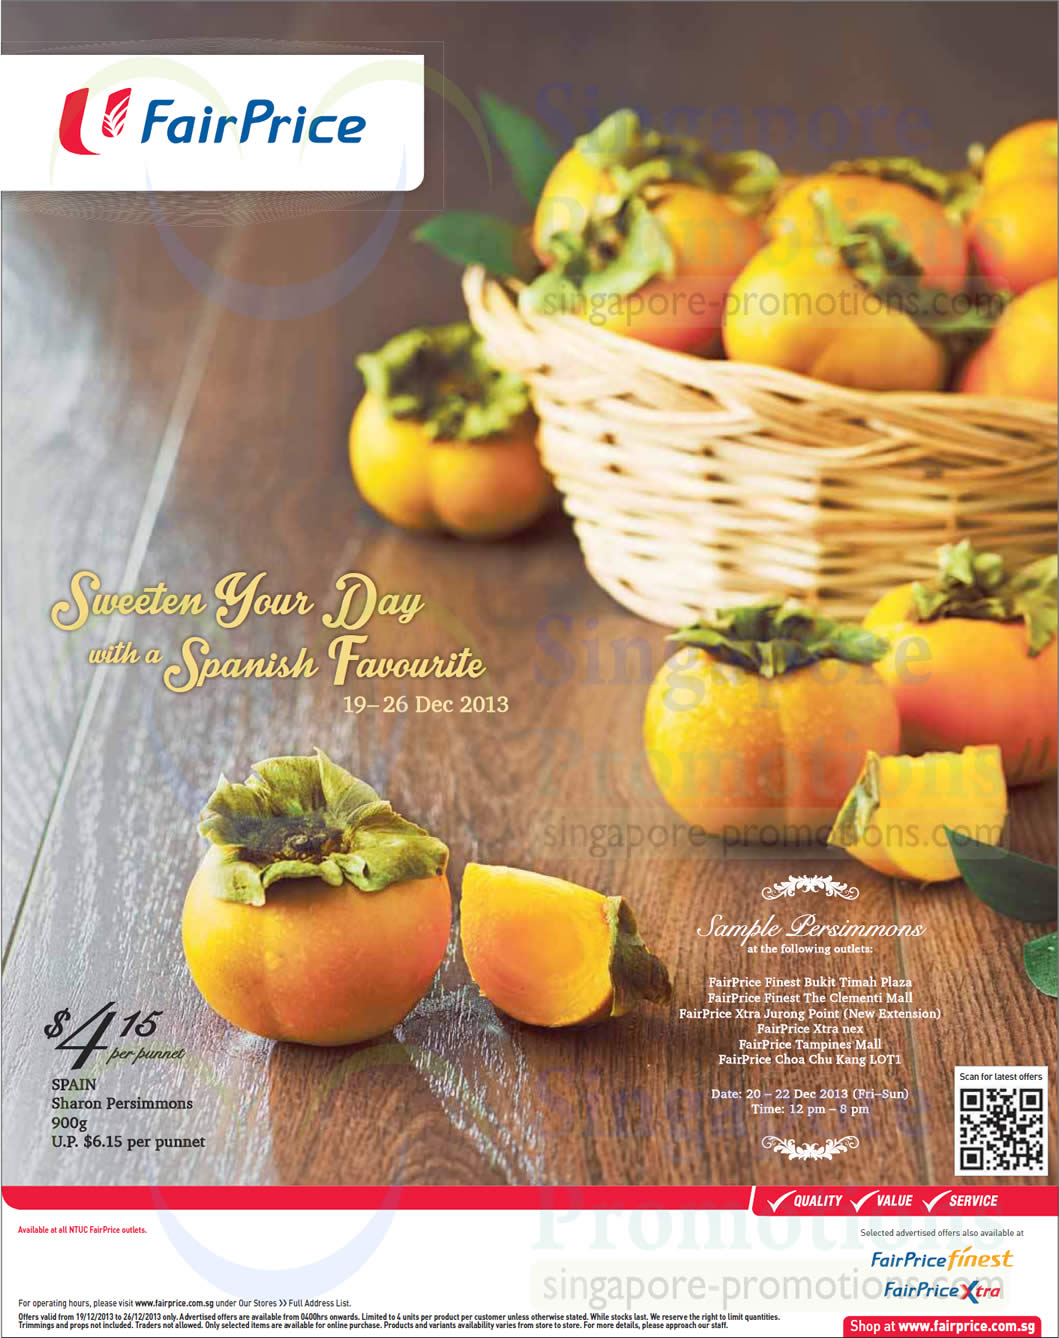 Featured image for NTUC Fairprice Baby, Appliances, Taiyo & Other Offers 19 Dec 2013 - 1 Jan 2014